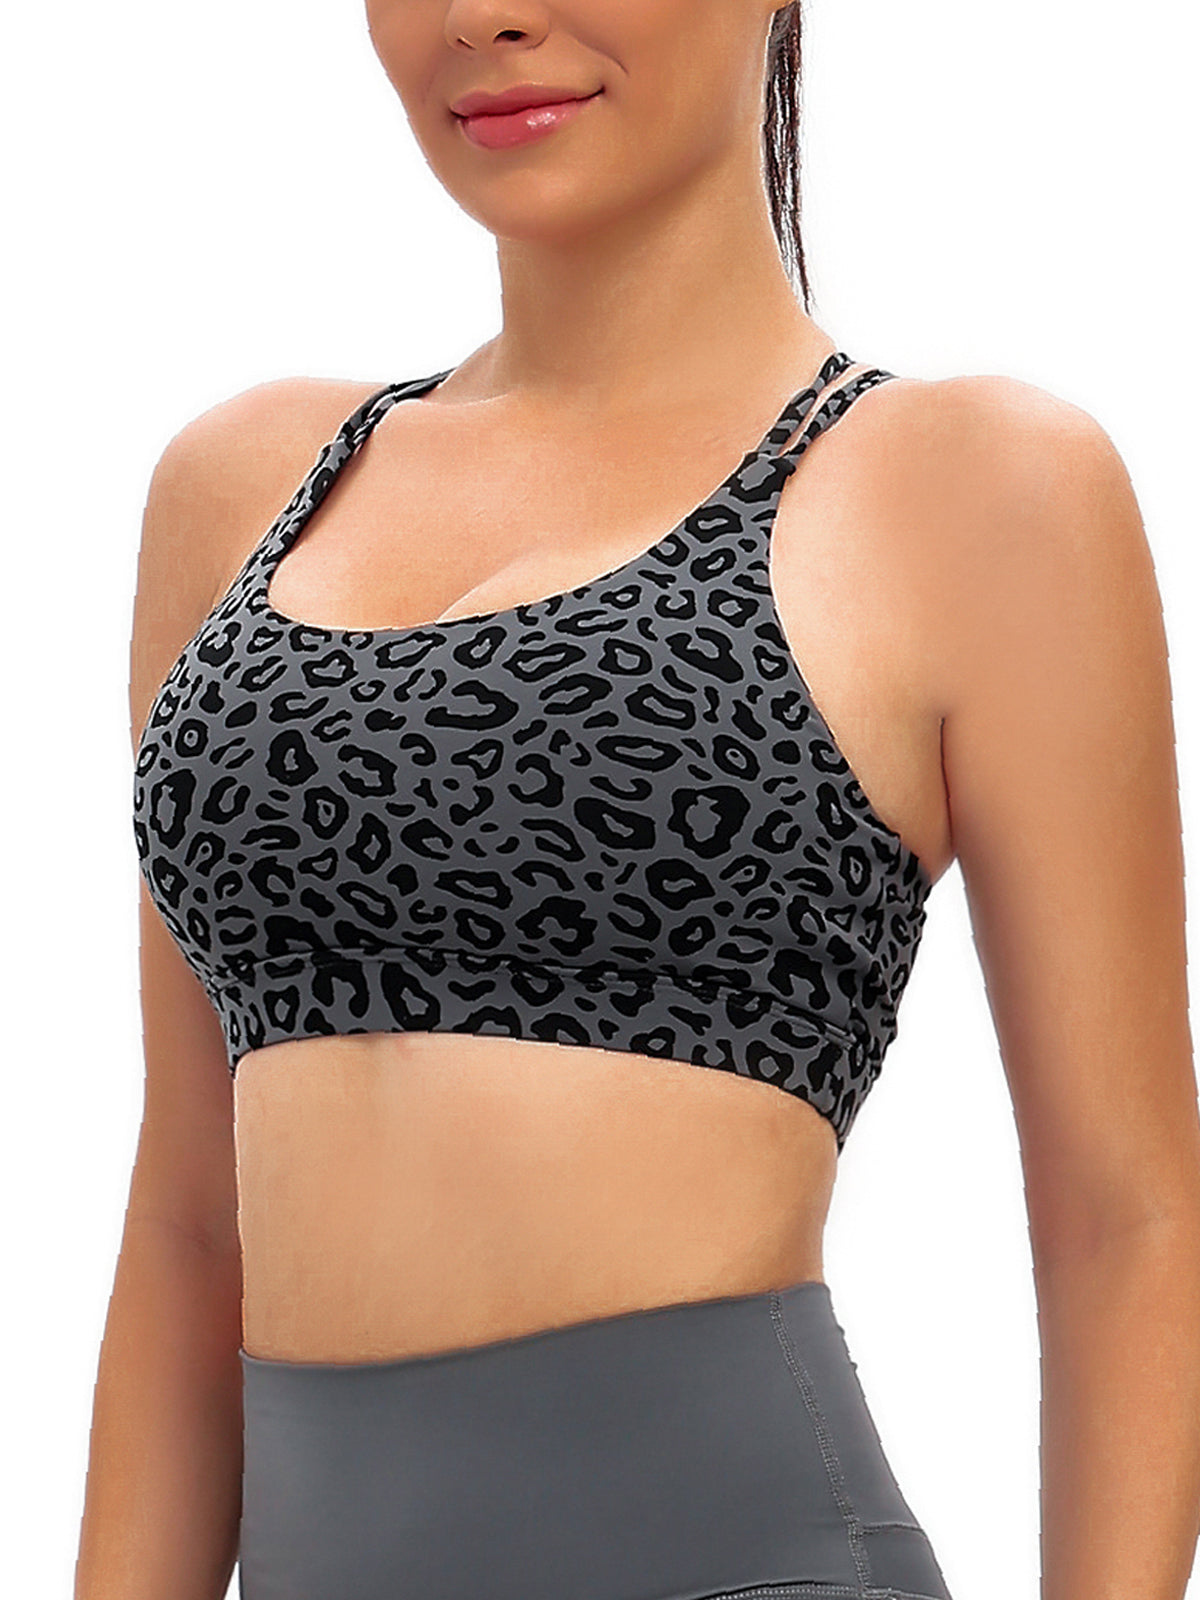 RUNNING GIRL Sports Bra for Women,High Impact Large Bust Padded Sports Bra  Fitness Workout Running Yoga Tank Tops (WX2827Black,L) at  Women's  Clothing store